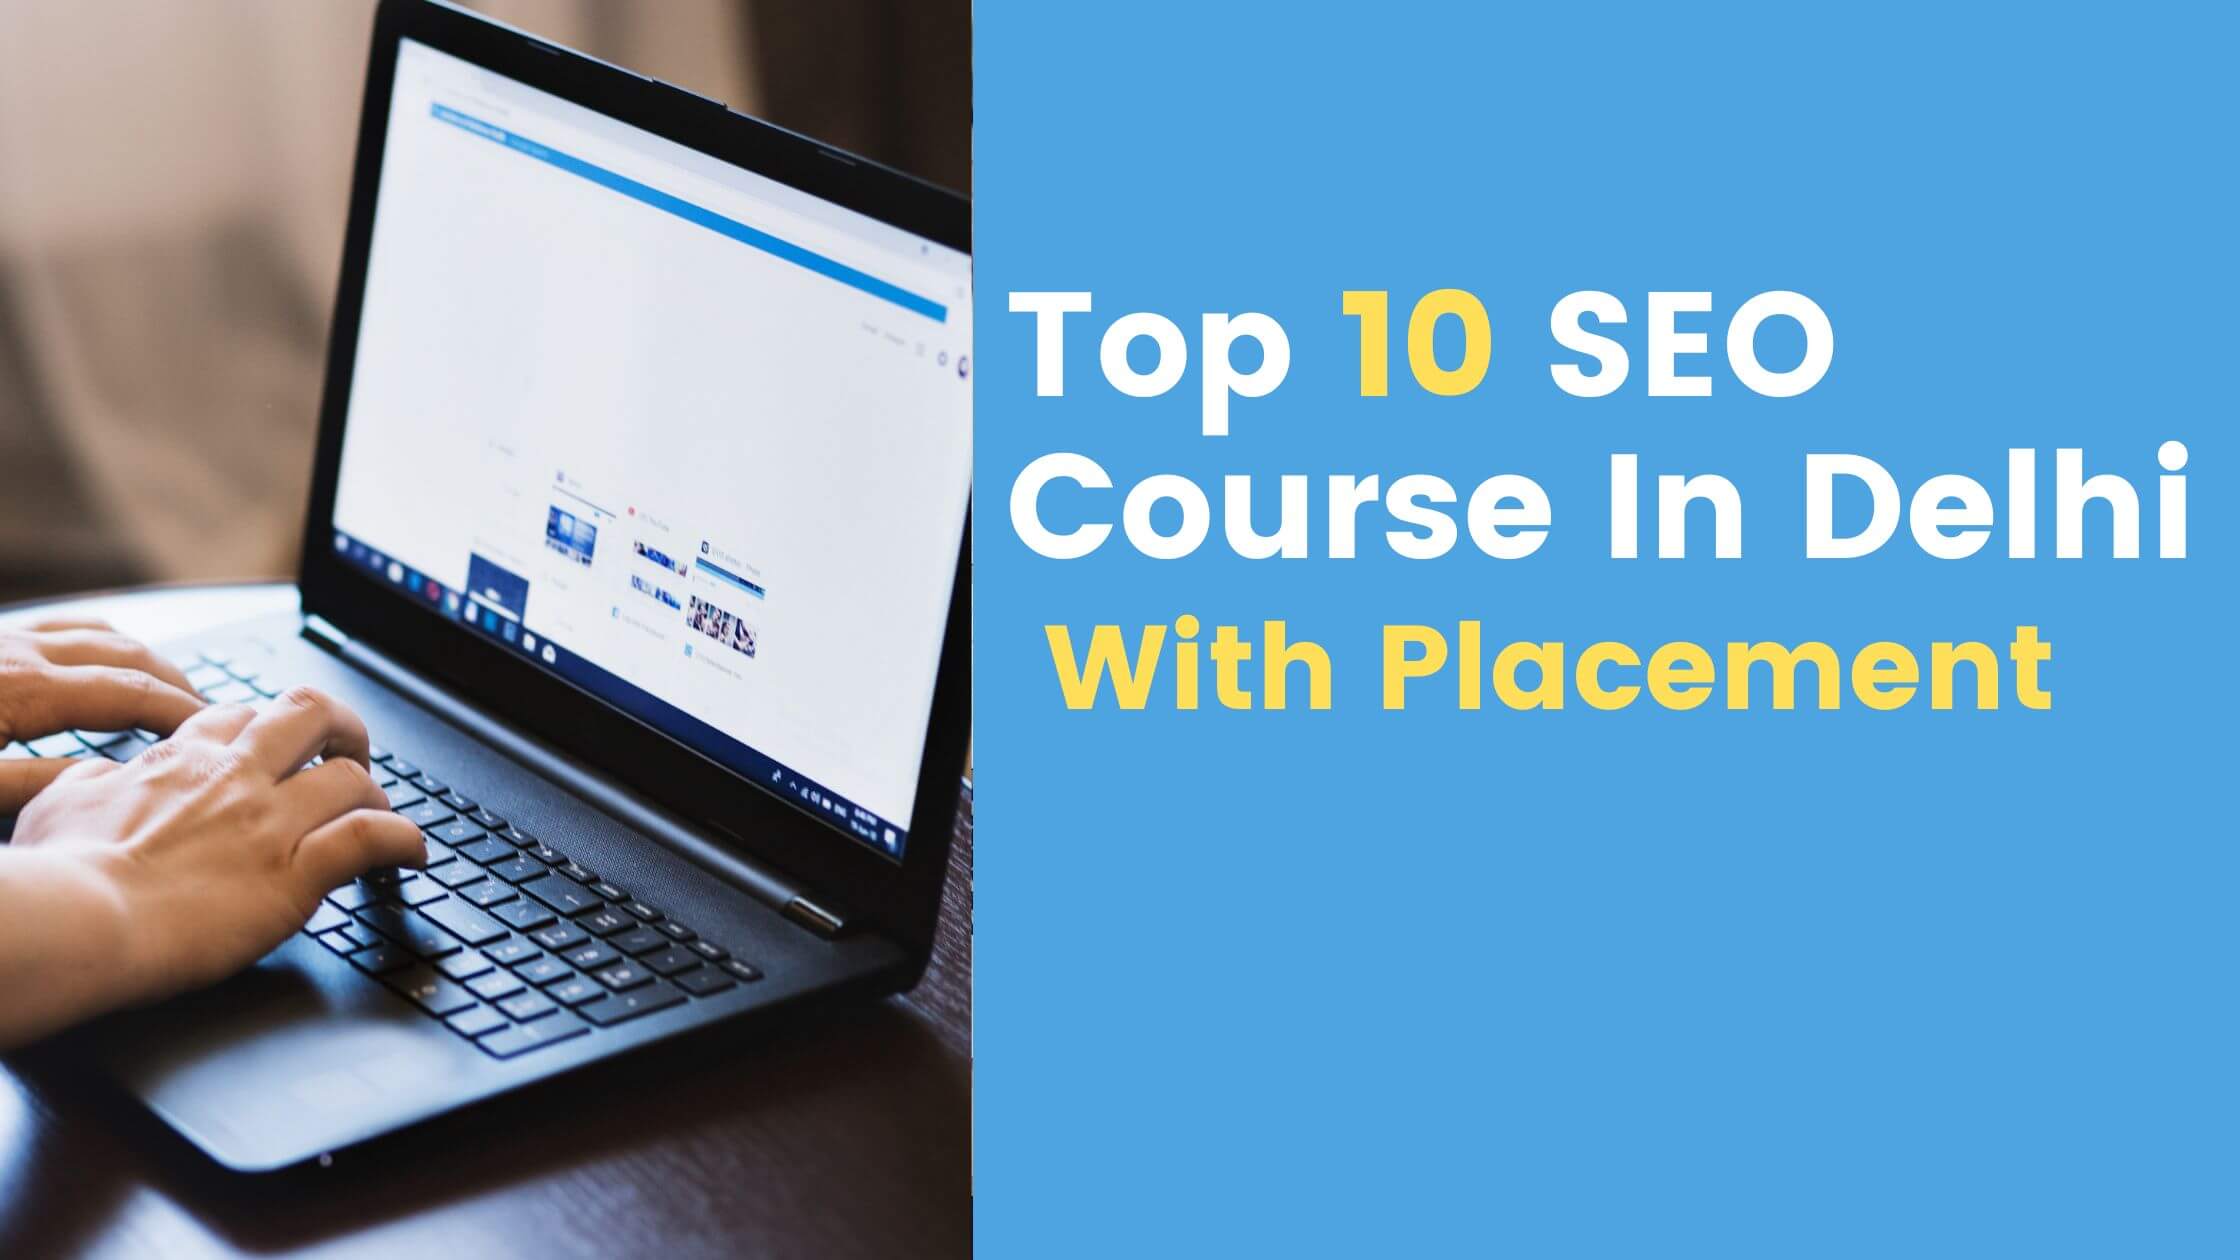 Top 10 SEO Courses in Delhi with Placement